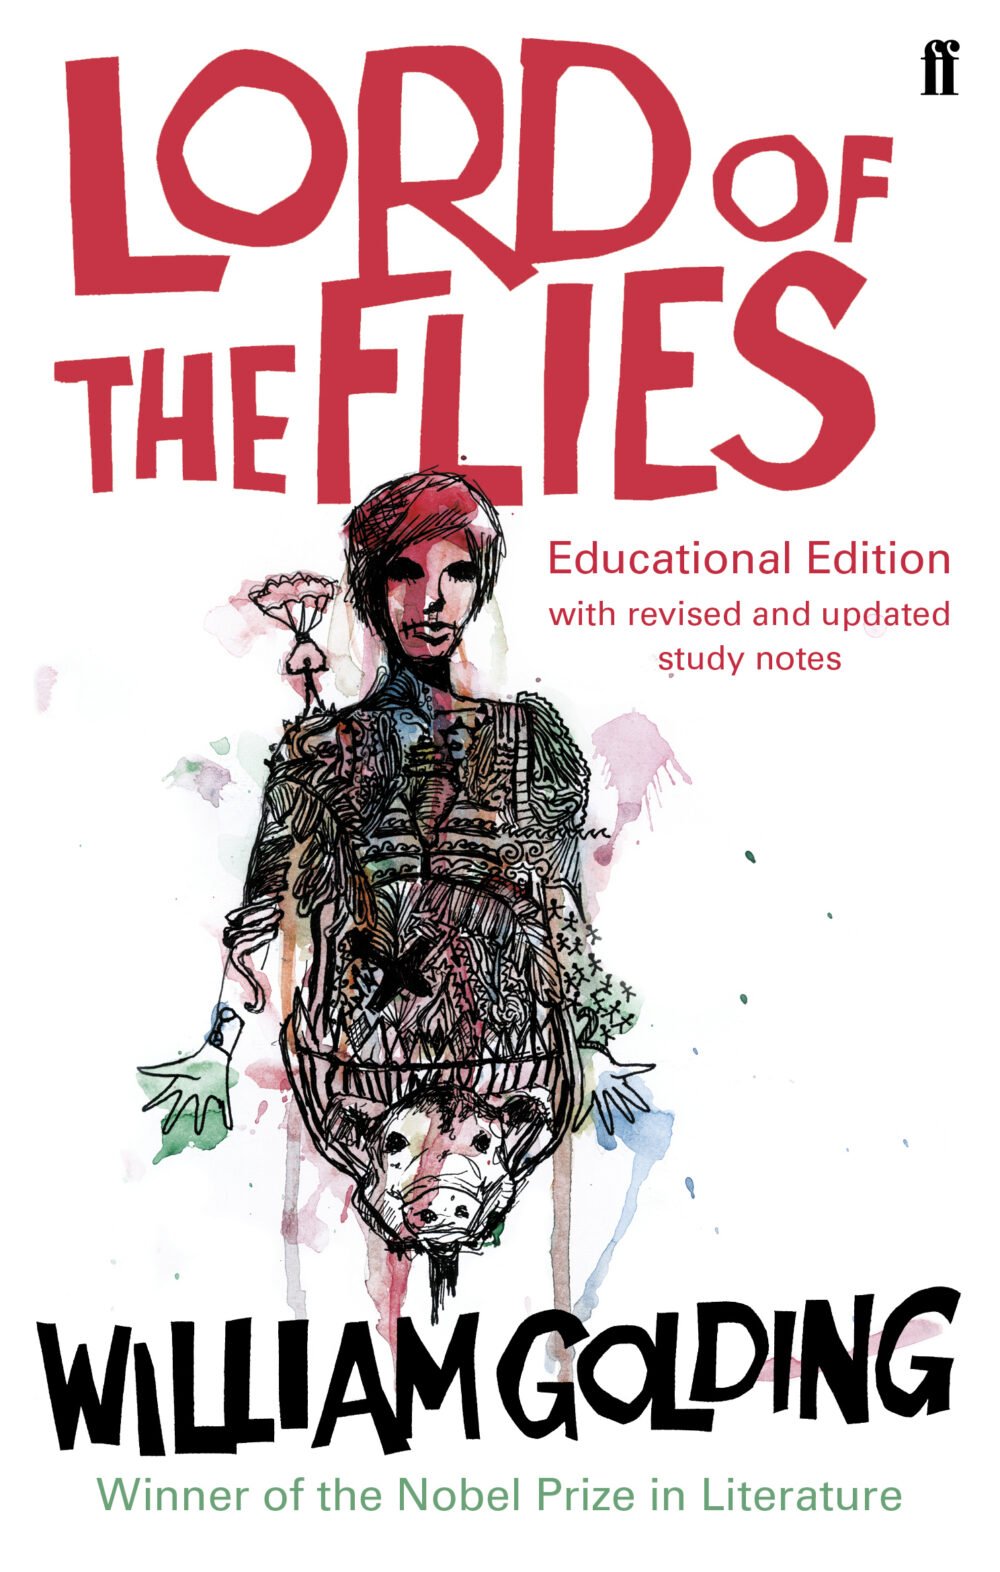 literary essay on lord of the flies